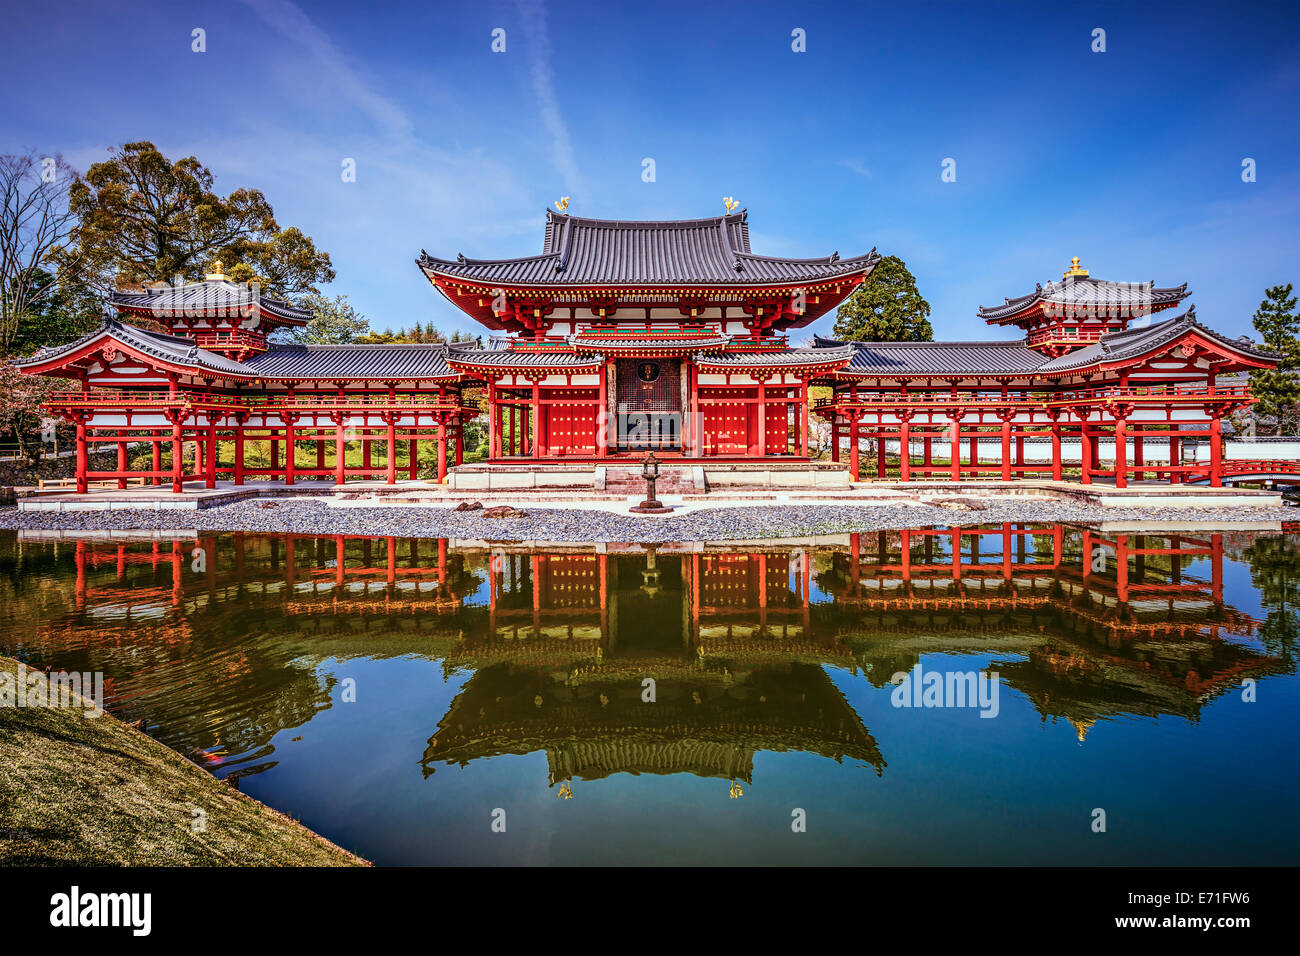 Kyoto, Japan at Byodo-in Temple and garden. Stock Photo